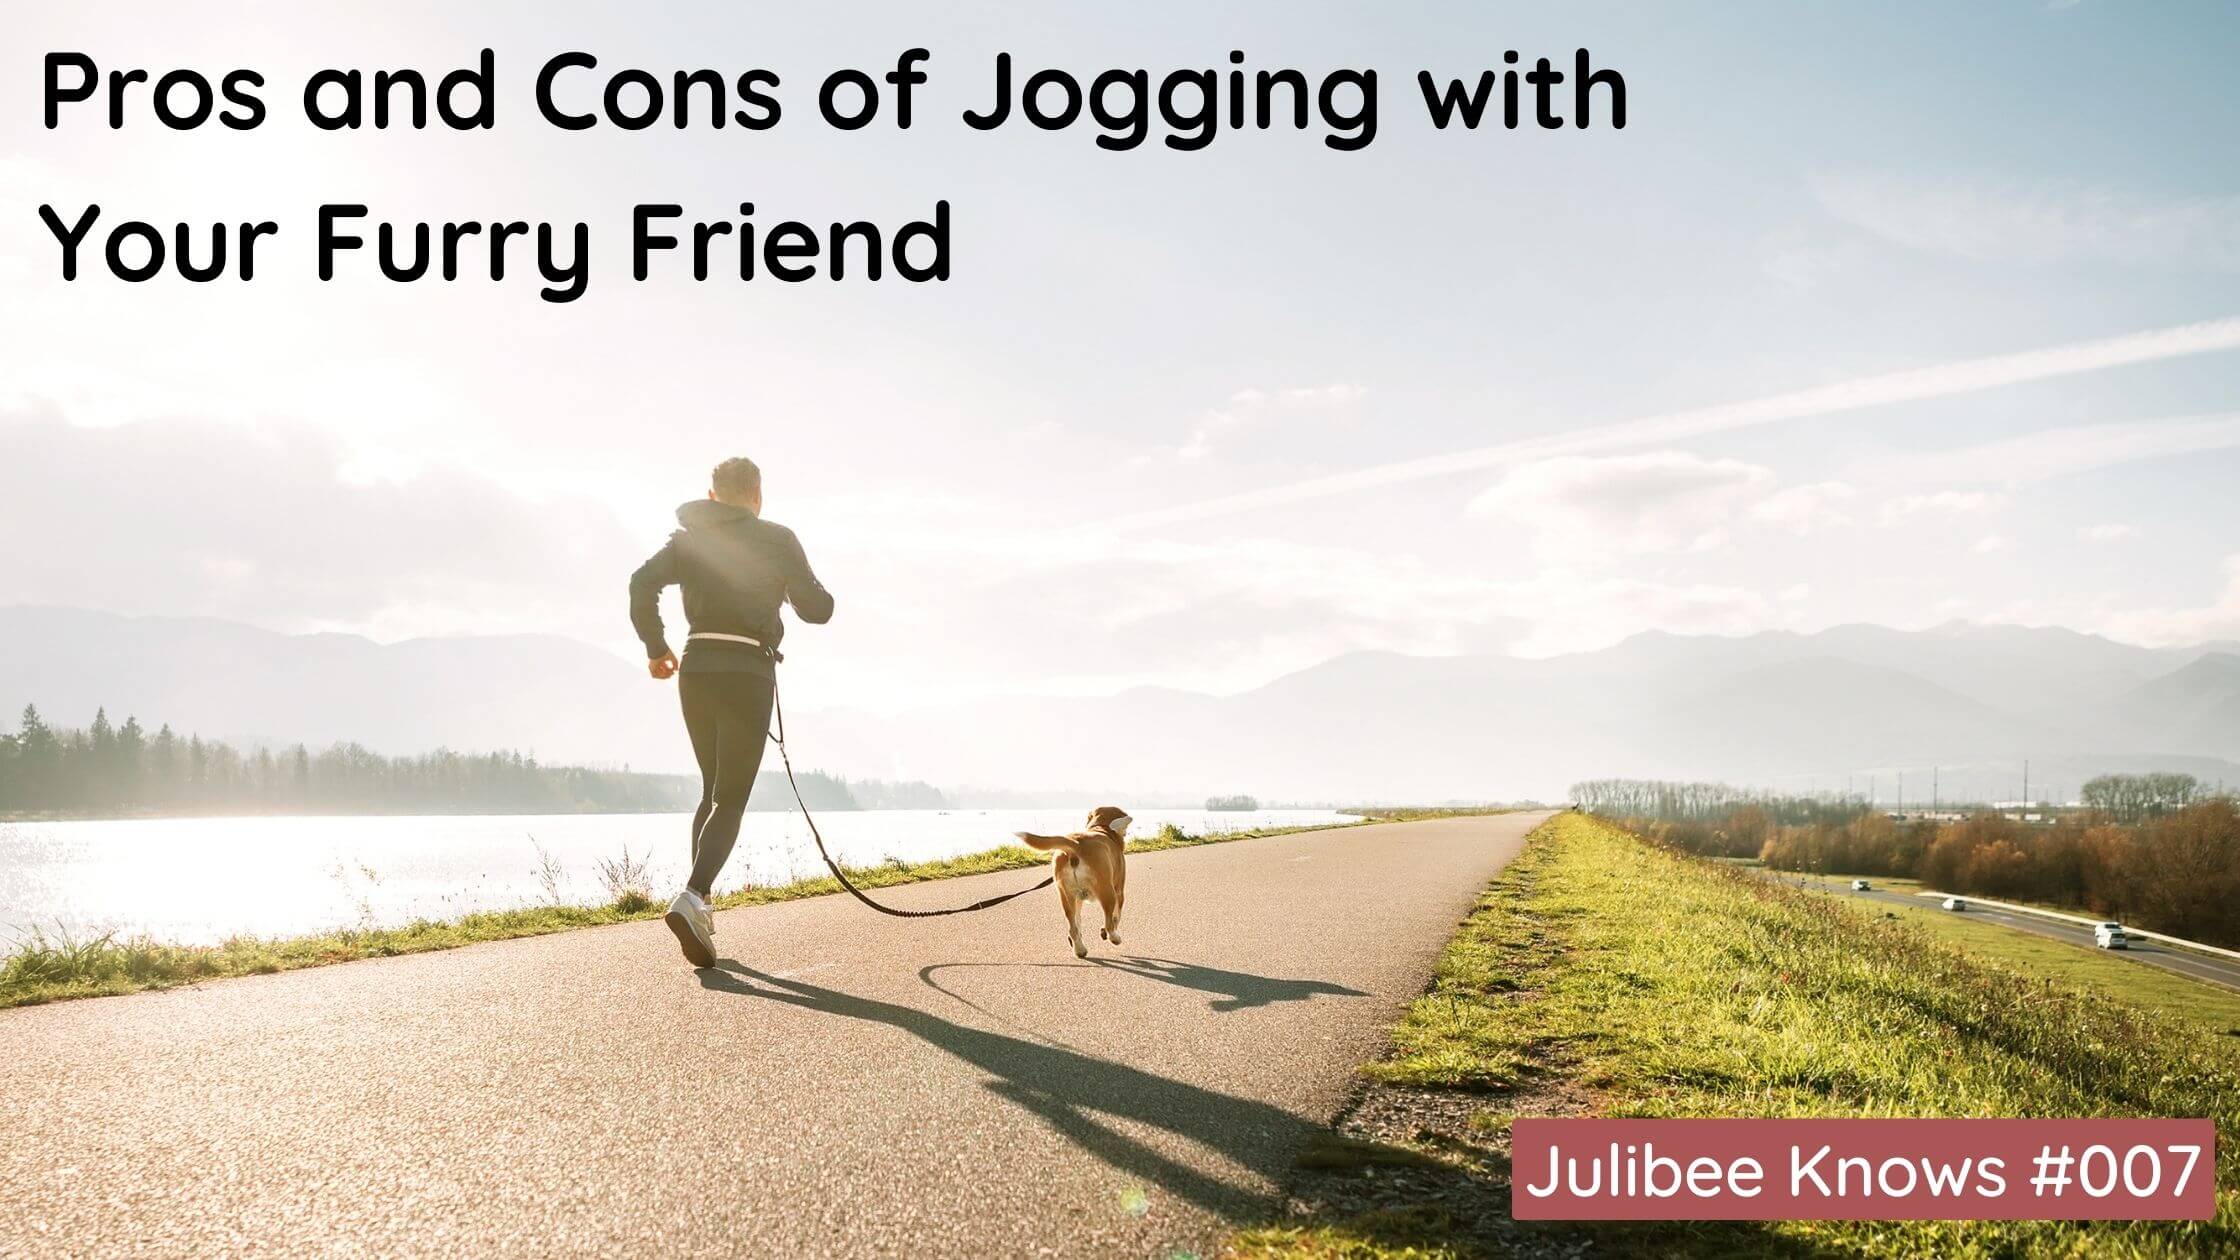 Pros and Cons of Jogging with Your Furry Friend